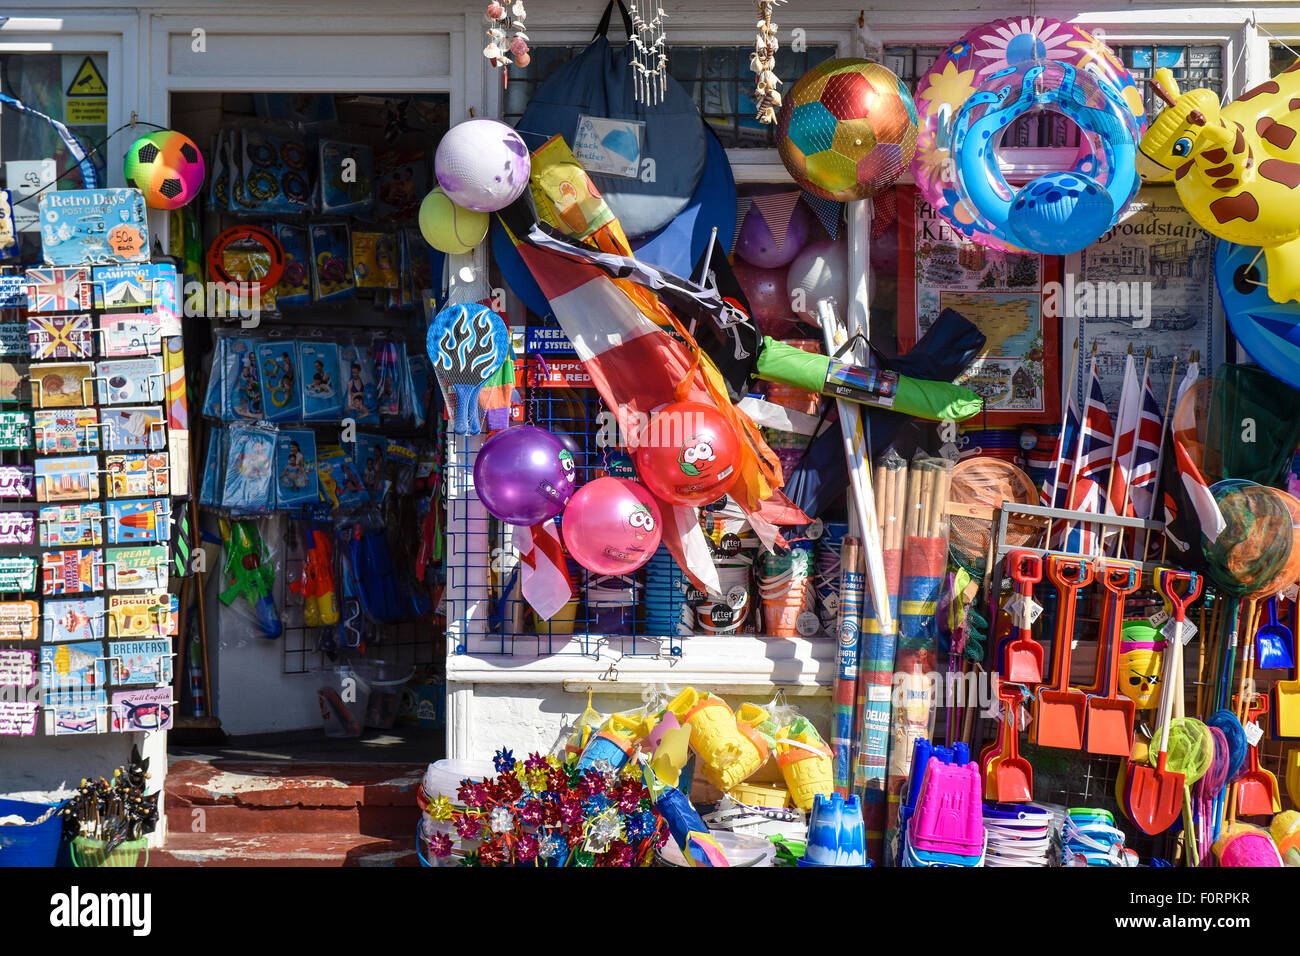 A shop selling traditional beach toys and goods in Broadstairs, Kent. Stock Photo